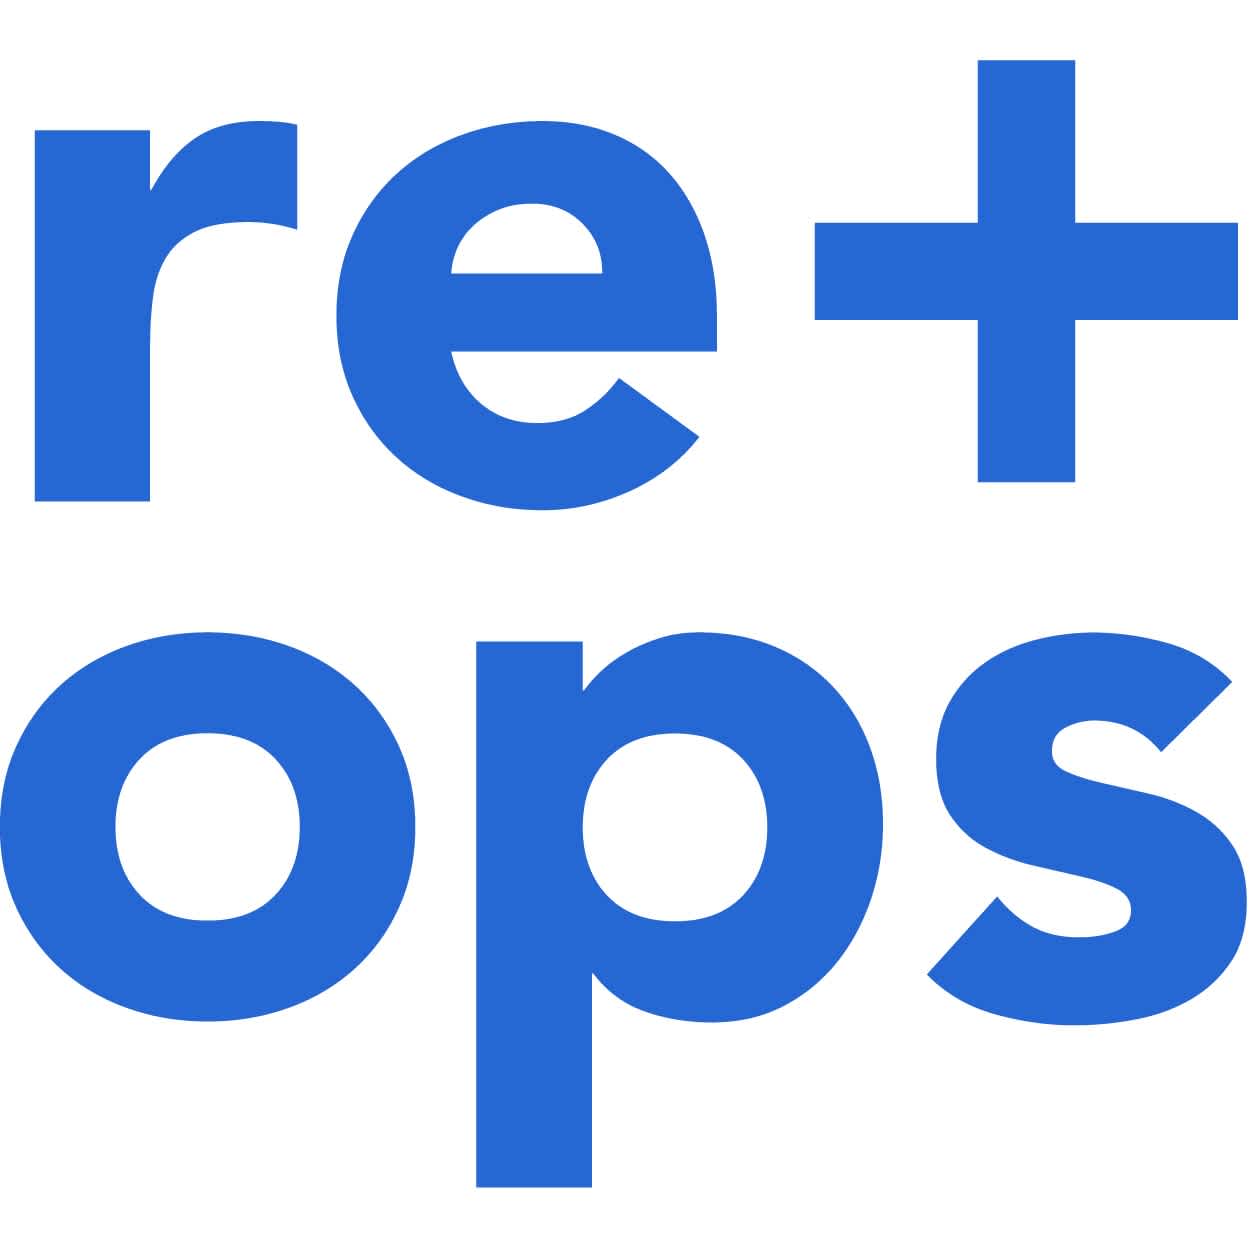 Re+Ops, a dedicated space for all things ResearchOps. 